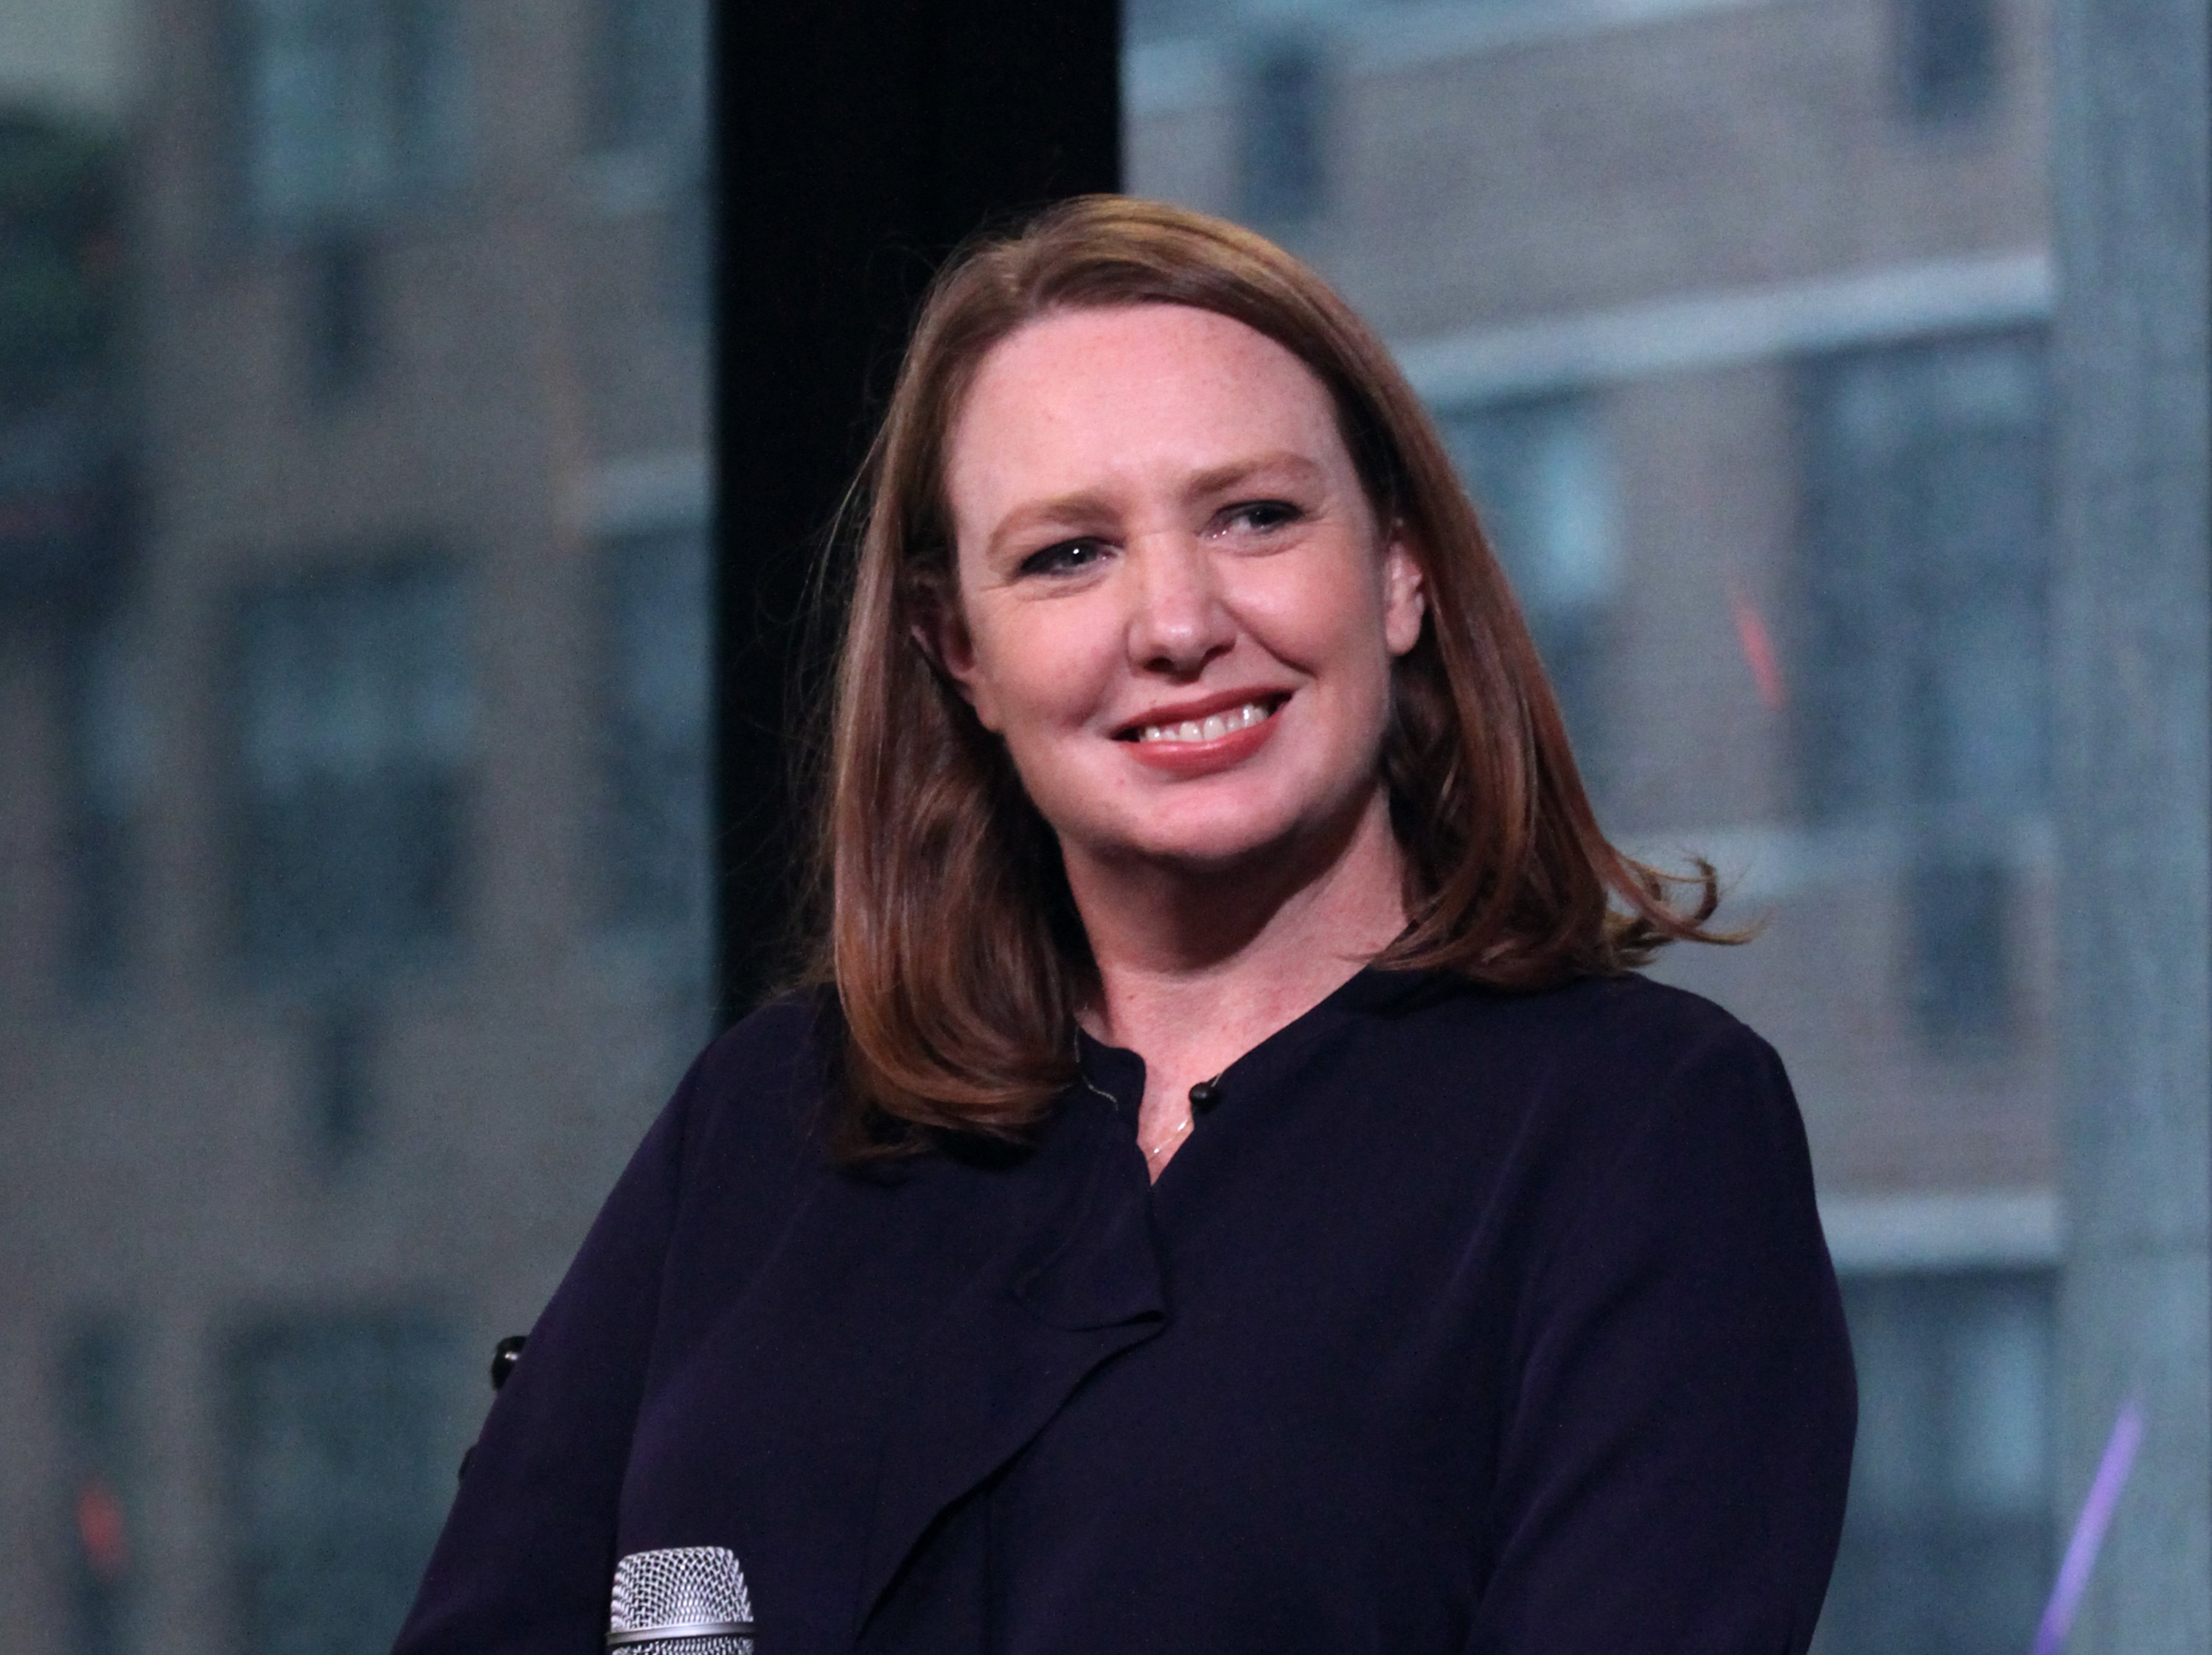 The Build Series Presents Paula Hawkins And Tate Taylor Discussing The New Film "Girl On The Train"